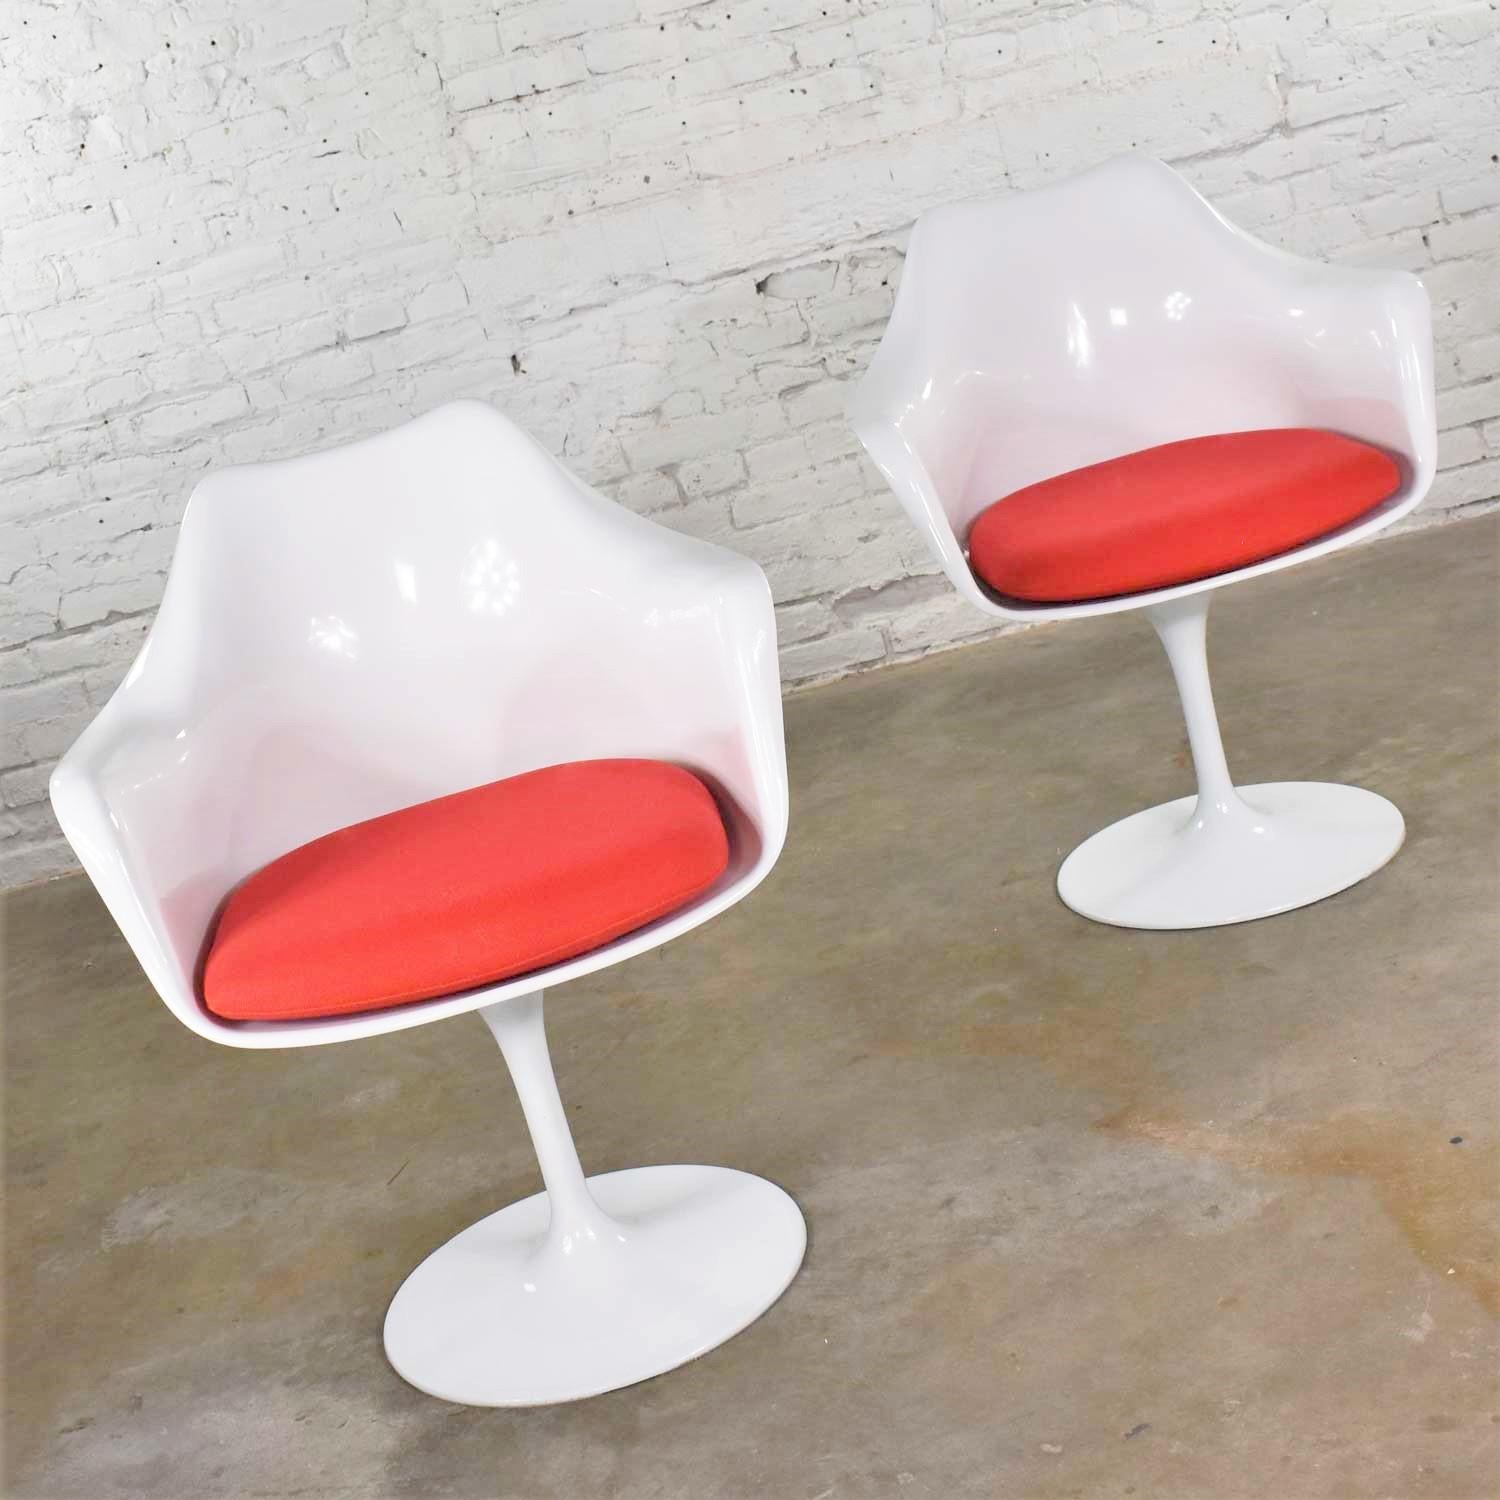 Handsome pair of replica Saarinen style tulip swivel chairs in white with bright red cushions. They are in wonderful used condition. They do have small nicks and dings around rim of base that have been touched up. Please see photos, circa early 21st